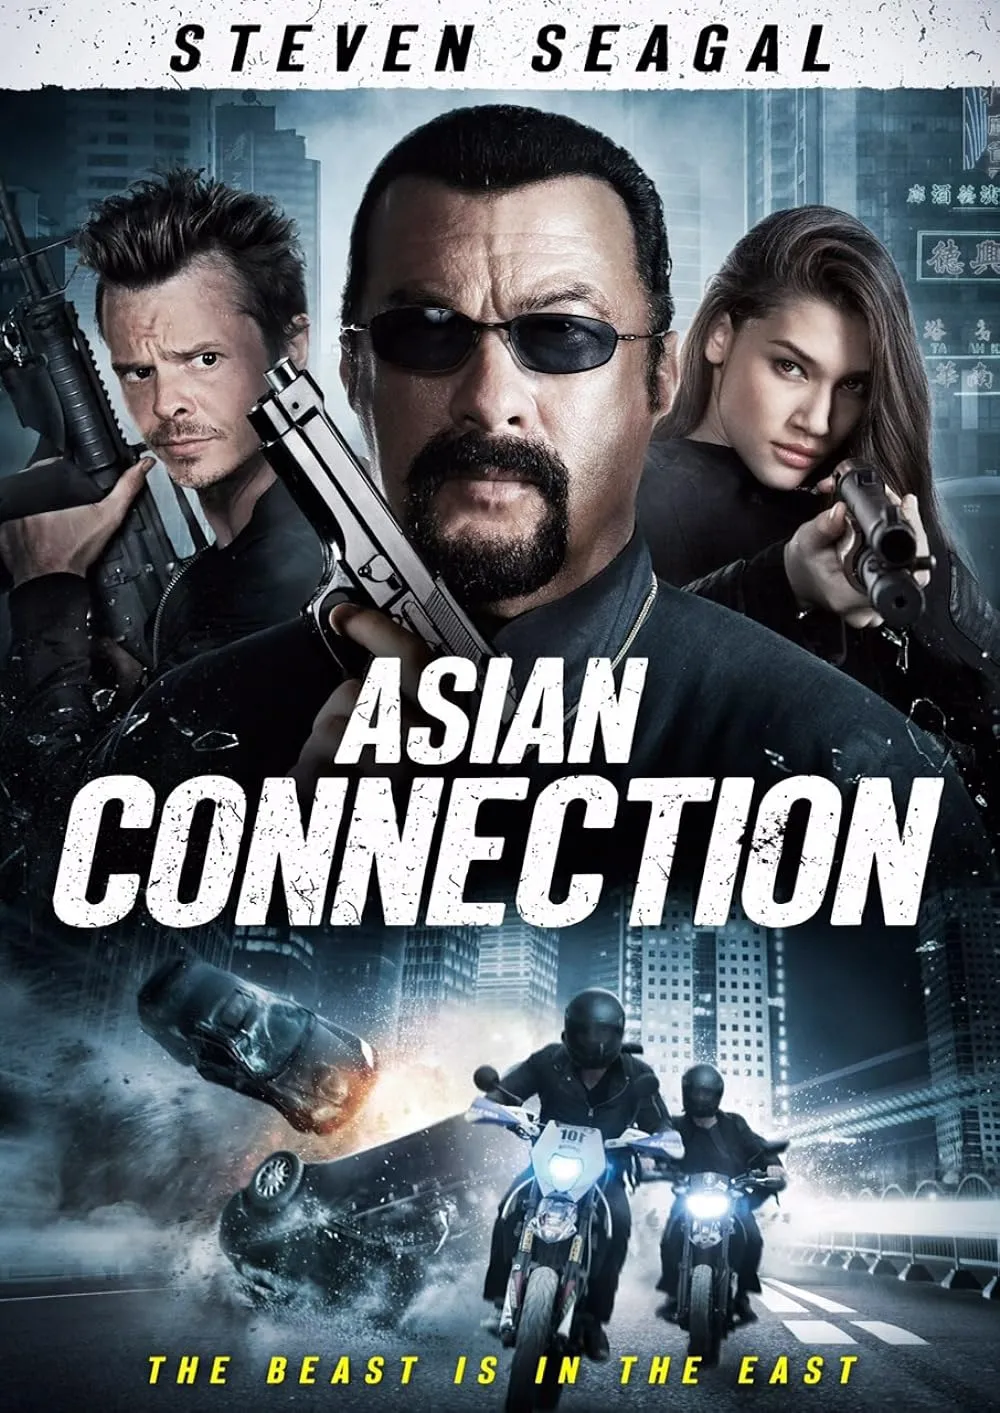 The Asian Connection 2016 Hindi ORG Dual Audio 720p BluRay ESub 900MB Download